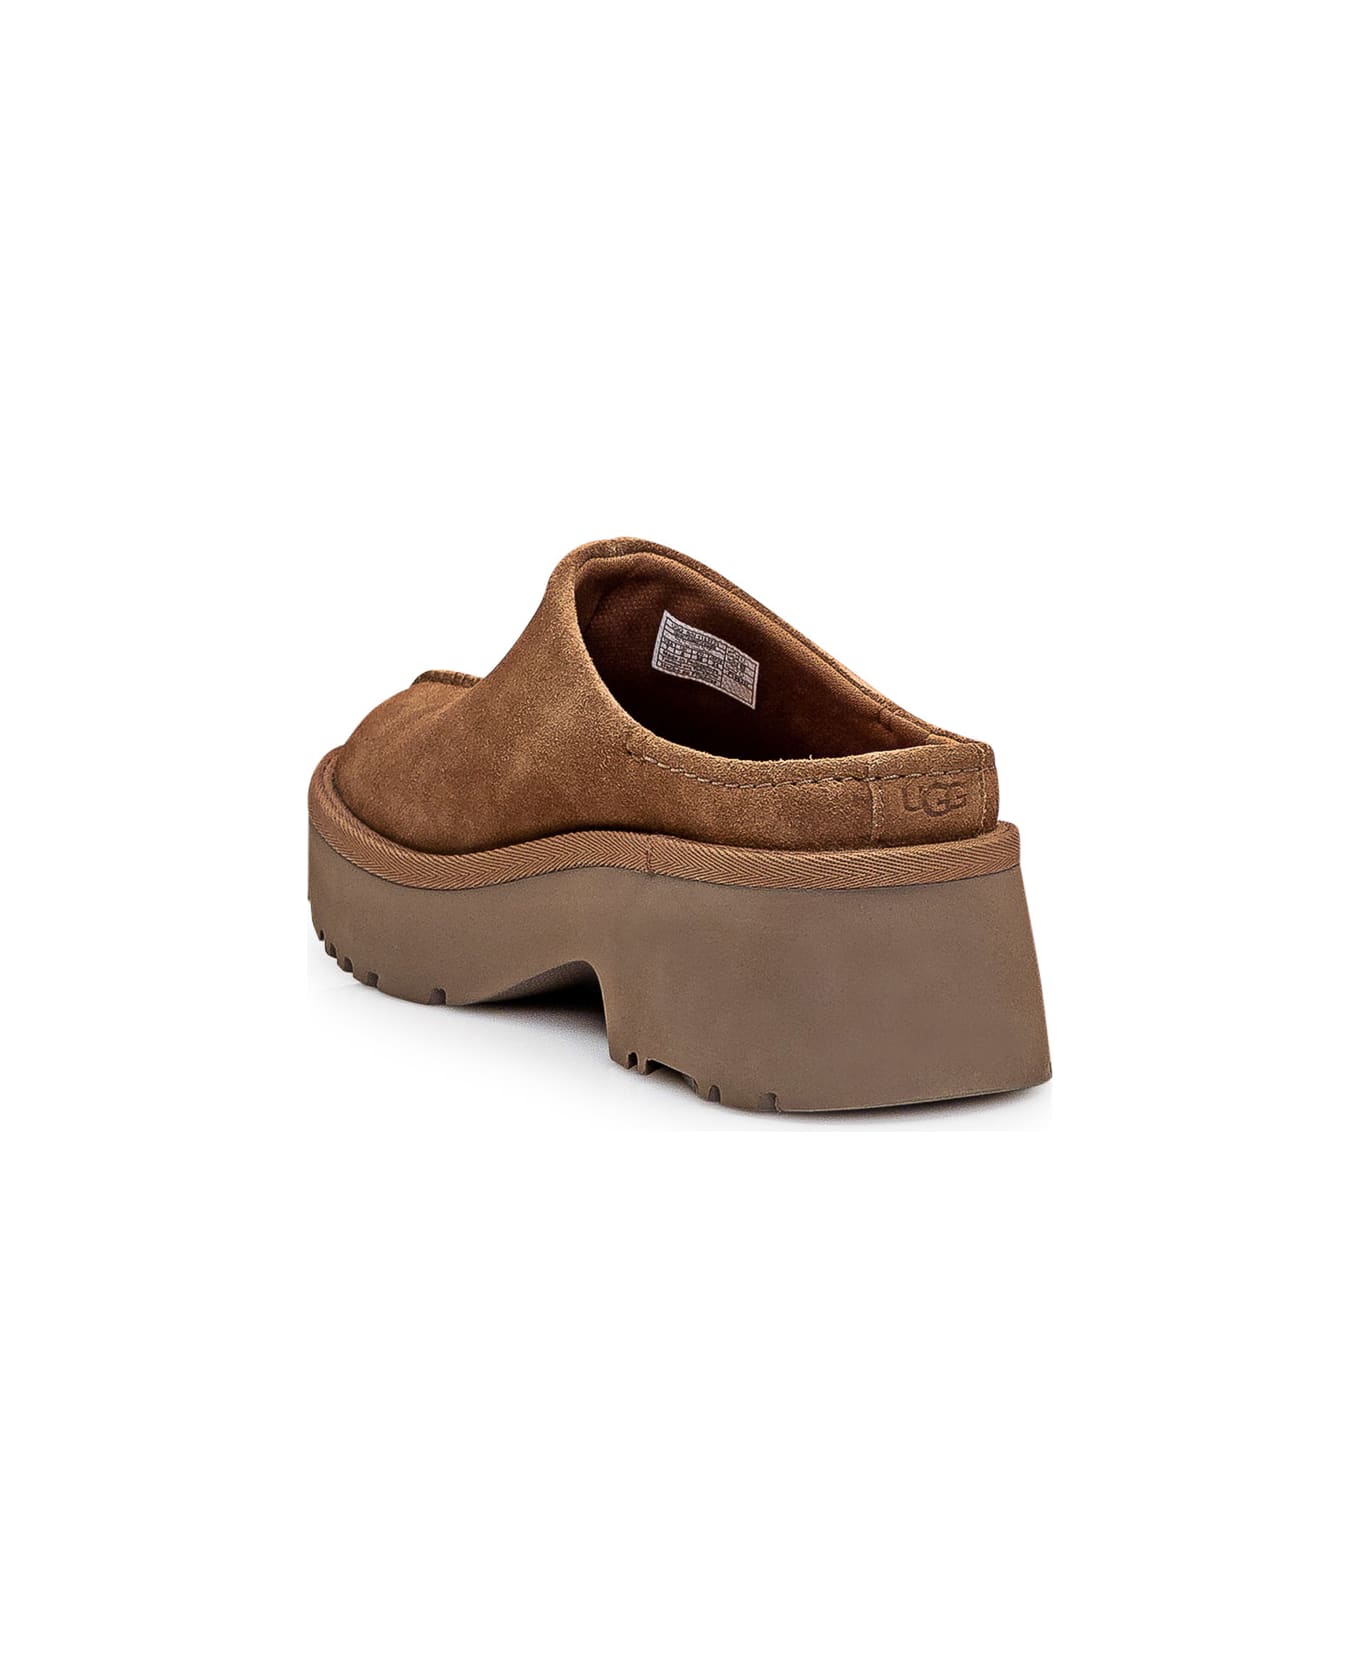 UGG New Heights Clog - Che Chestnut